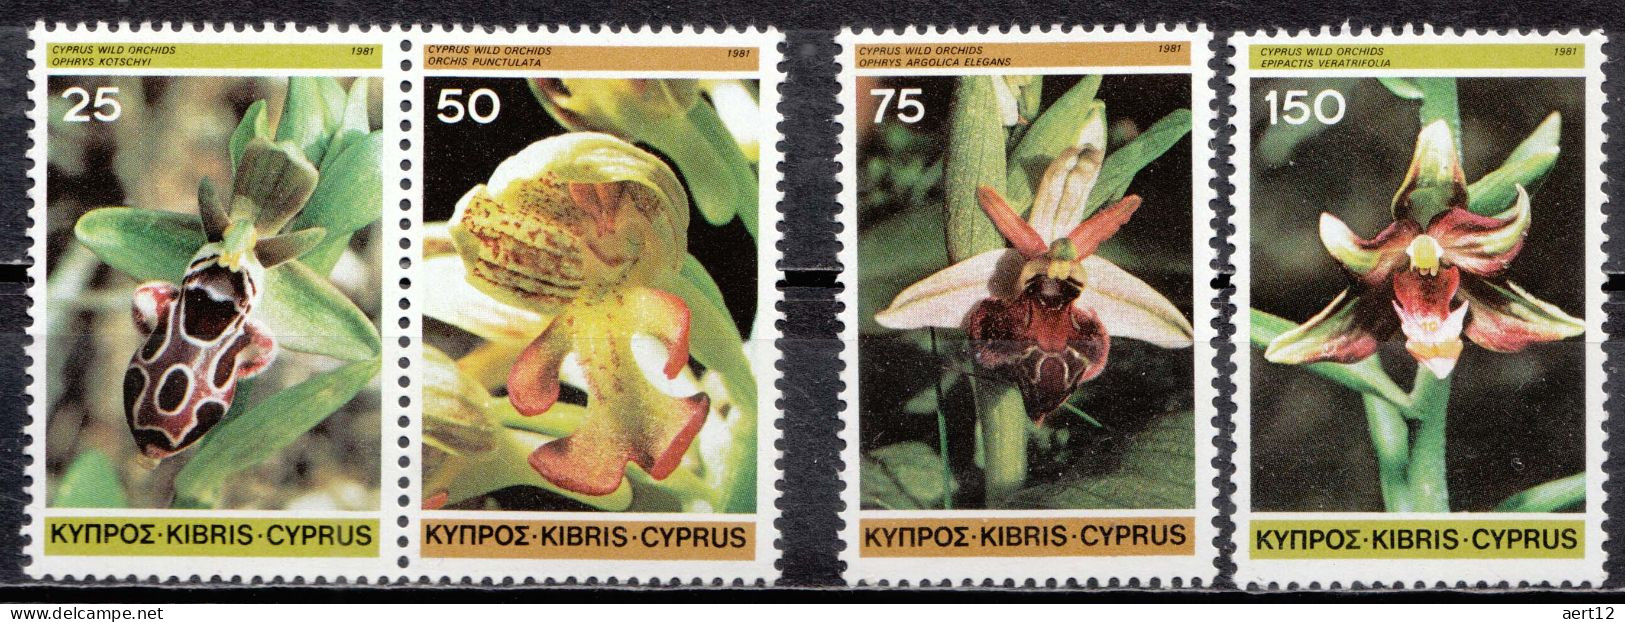 1981, Cyprus, Wild Orchids, Flowers, Orchids, Plants, 4 Stamps, MNH(**), CY 552-55 - Nuovi